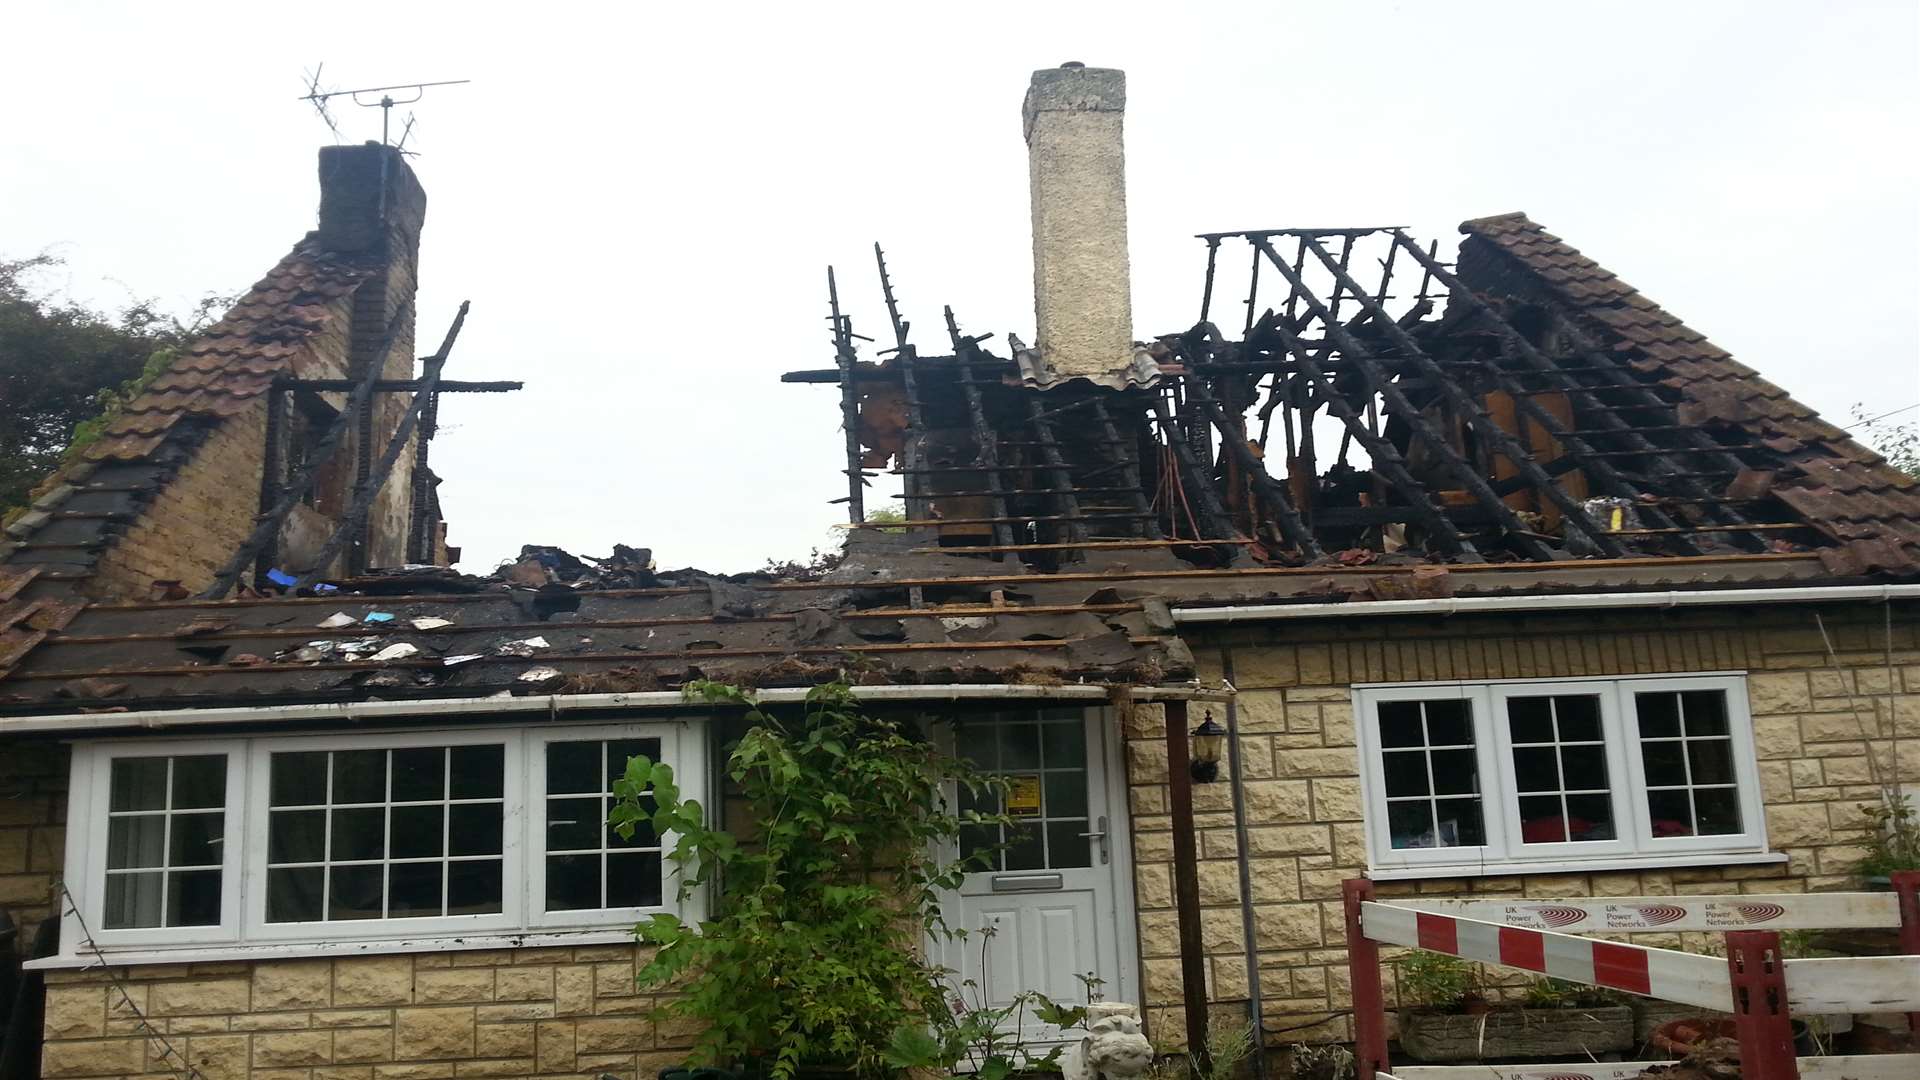 The lightning strike has destroyed the home in South Street